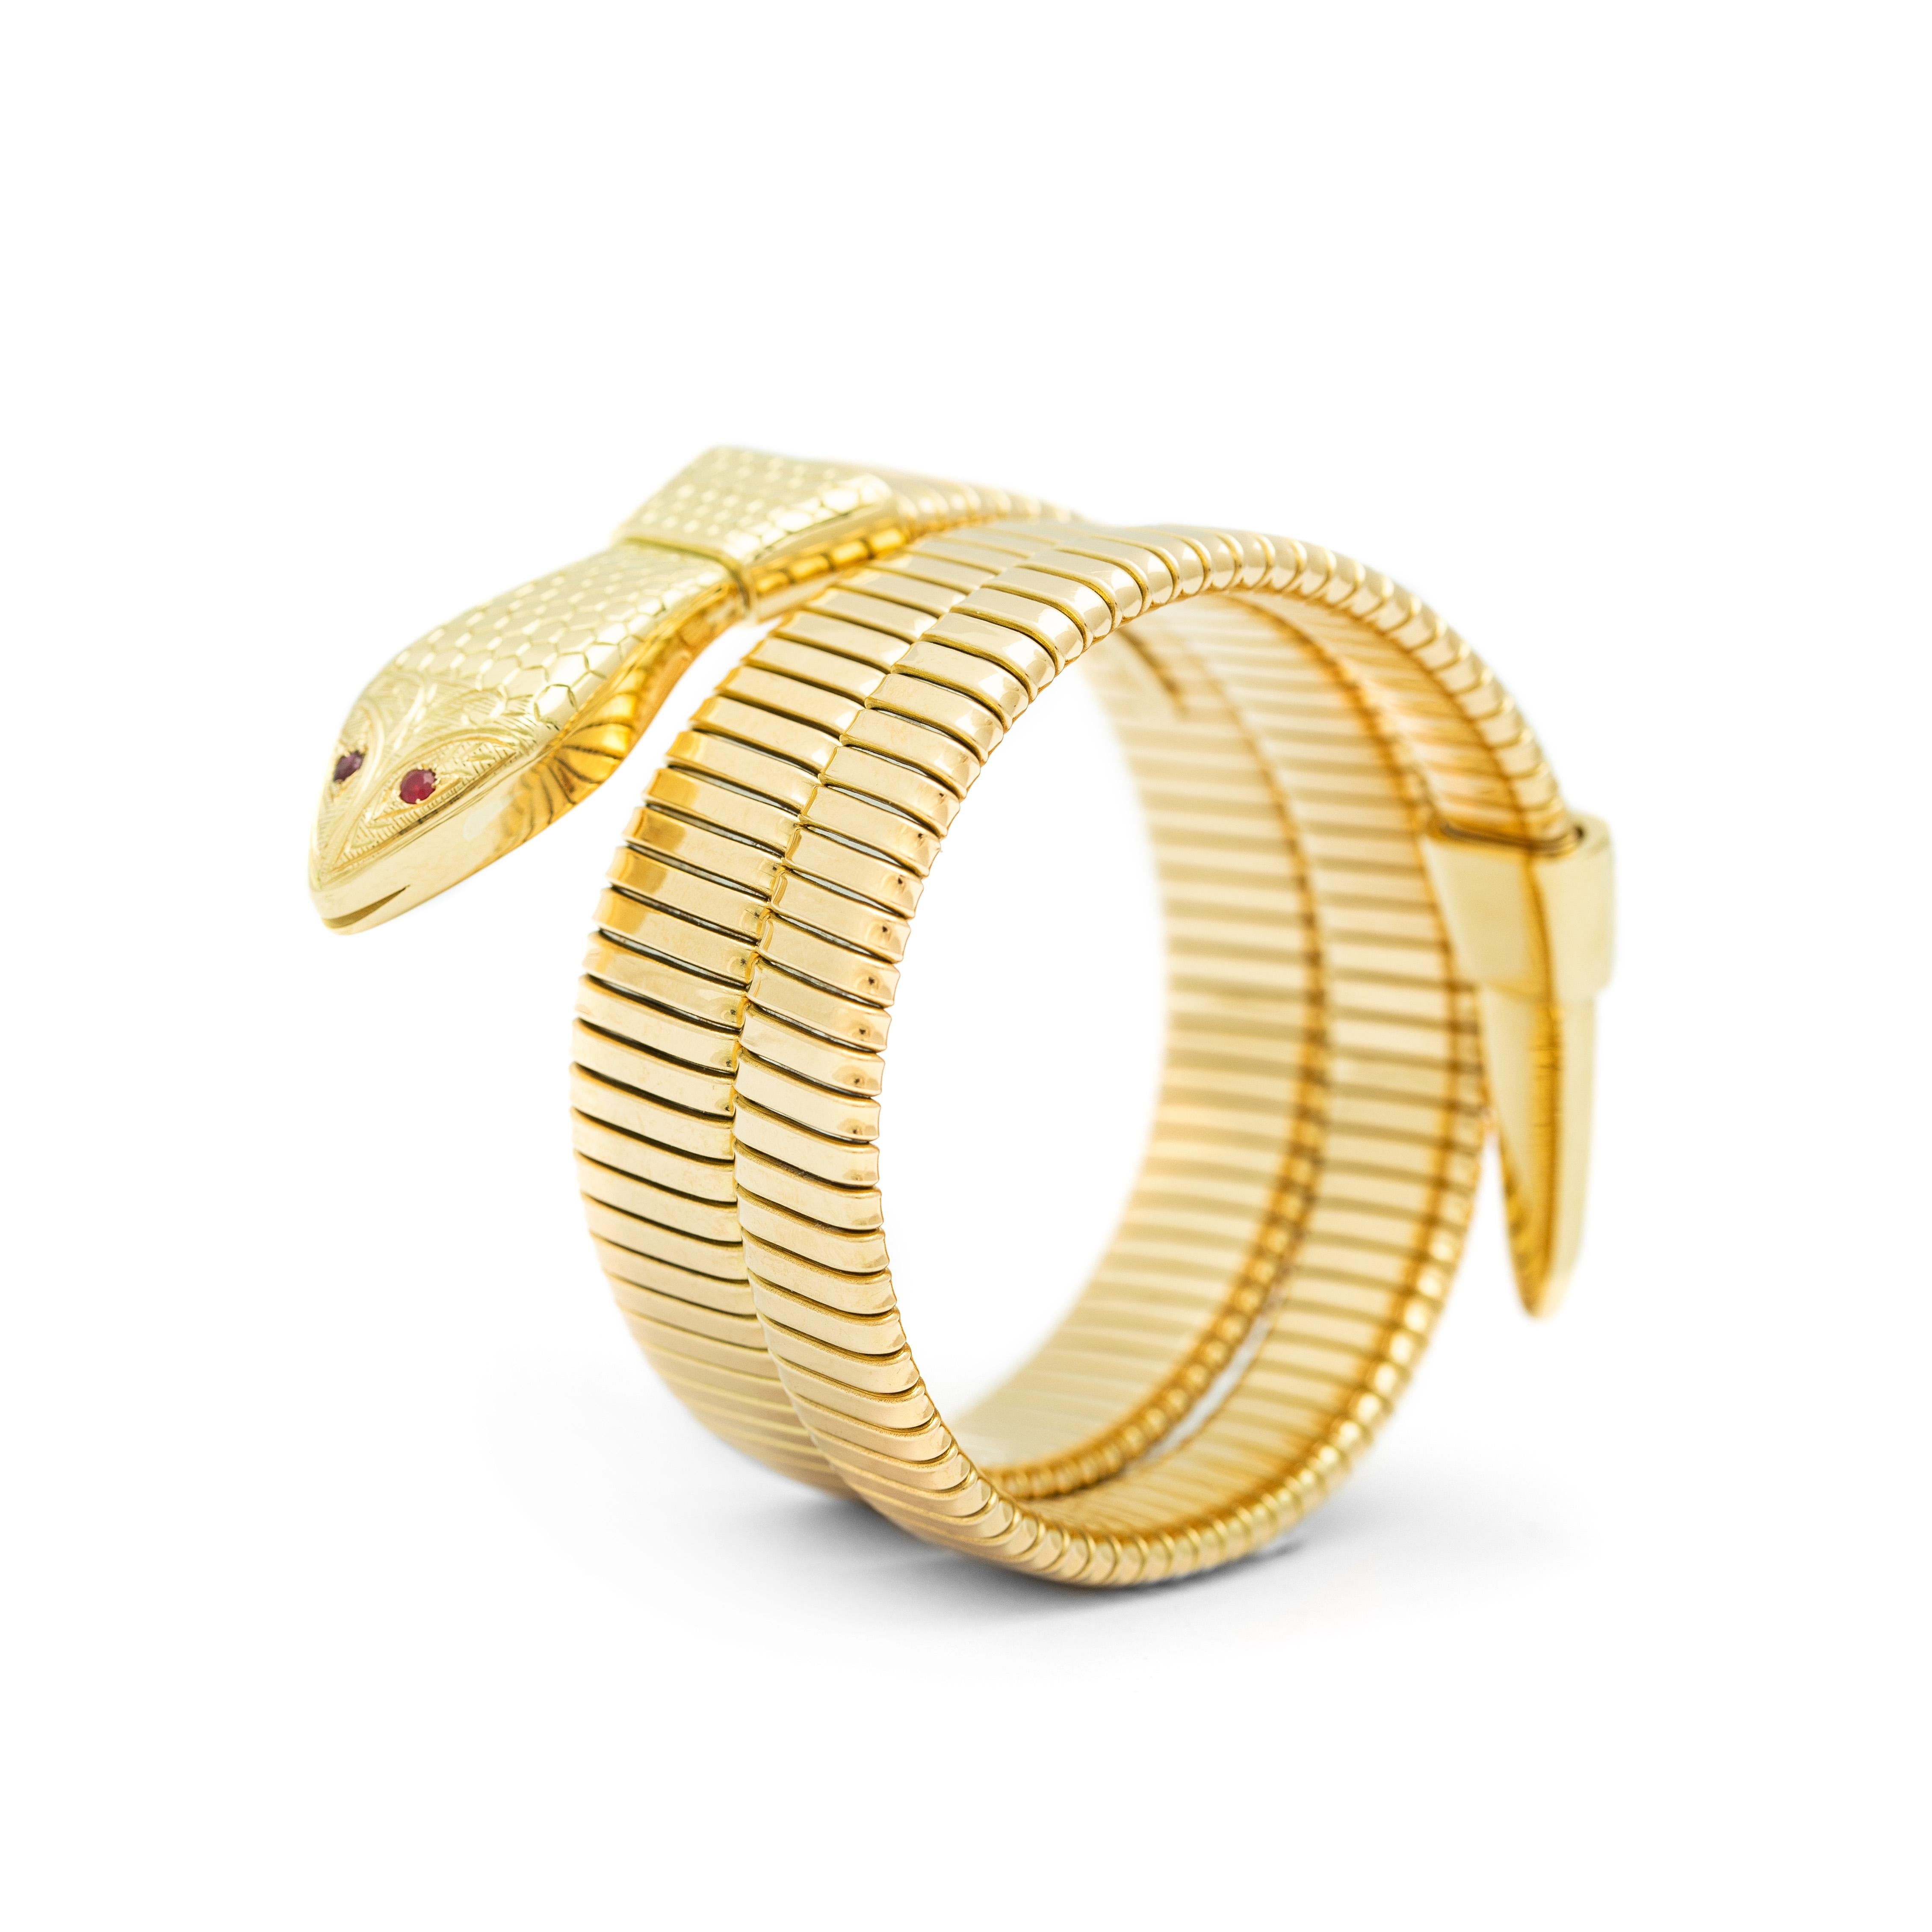 Round Cut Serpenti Tubogas Snake Yellow Gold 18k Bracelet For Sale